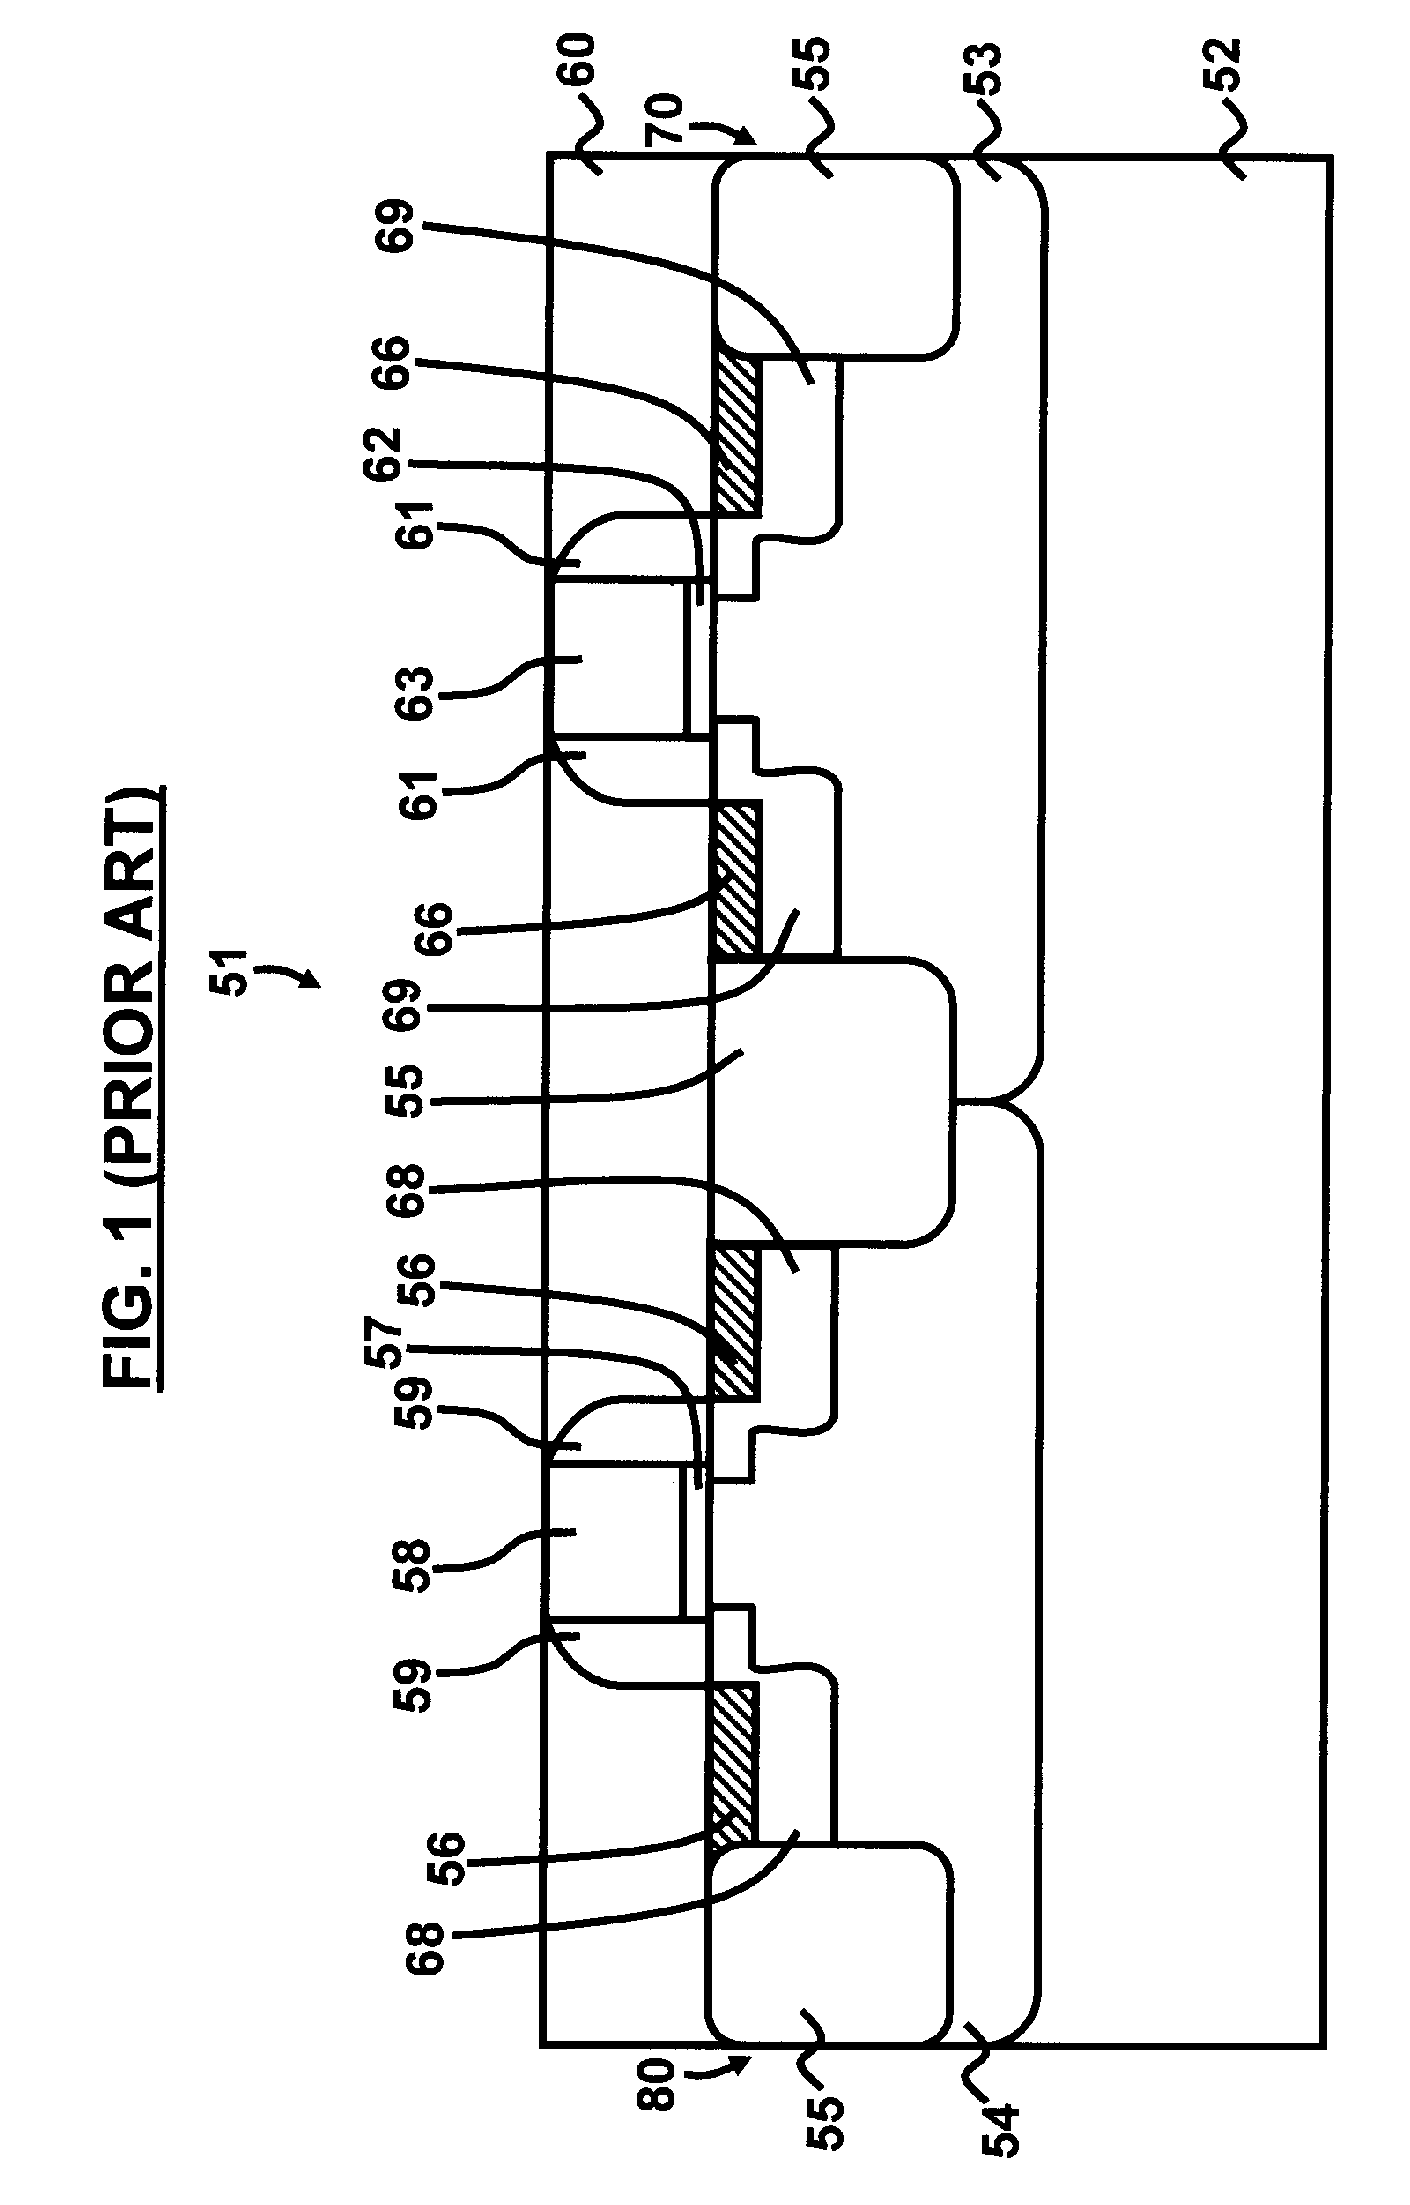 Method for forming self-aligned dual fully silicided gates in CMOS devices